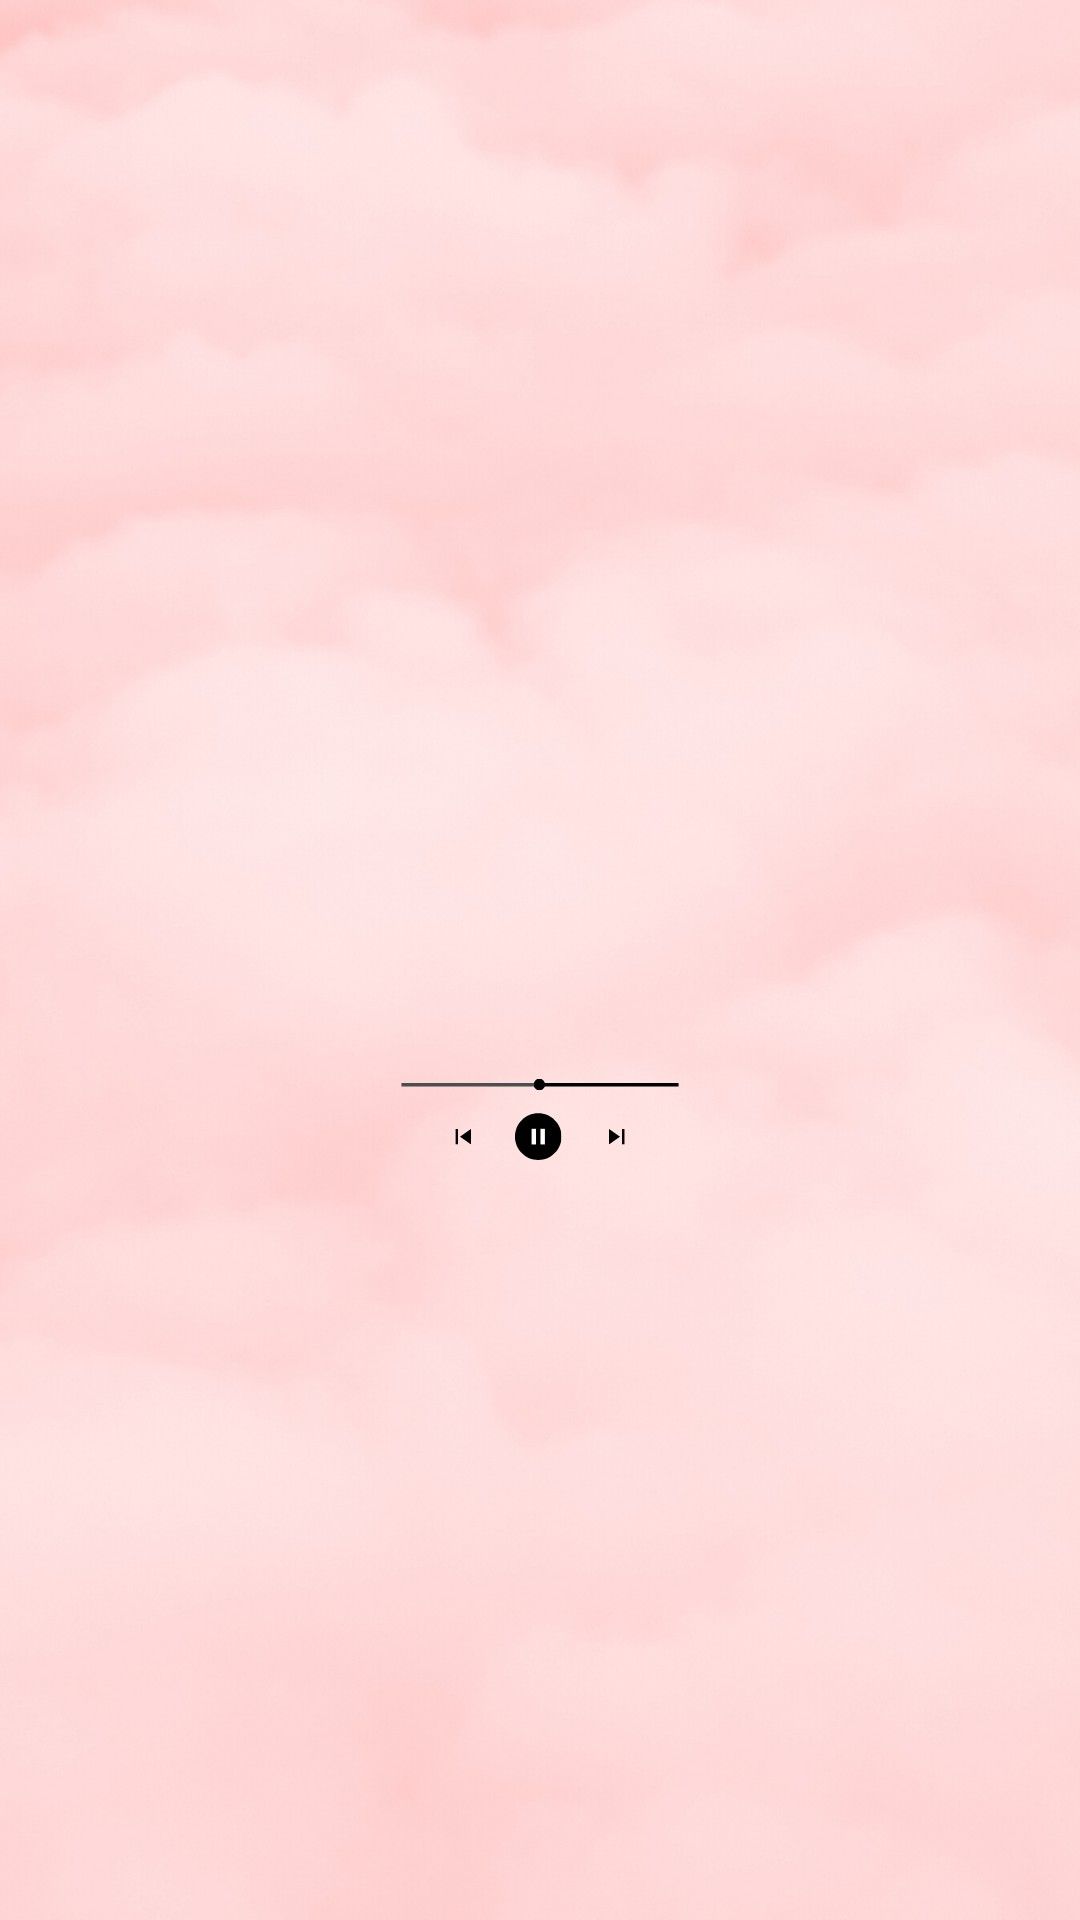 A helicopter flying over pink clouds - Clean